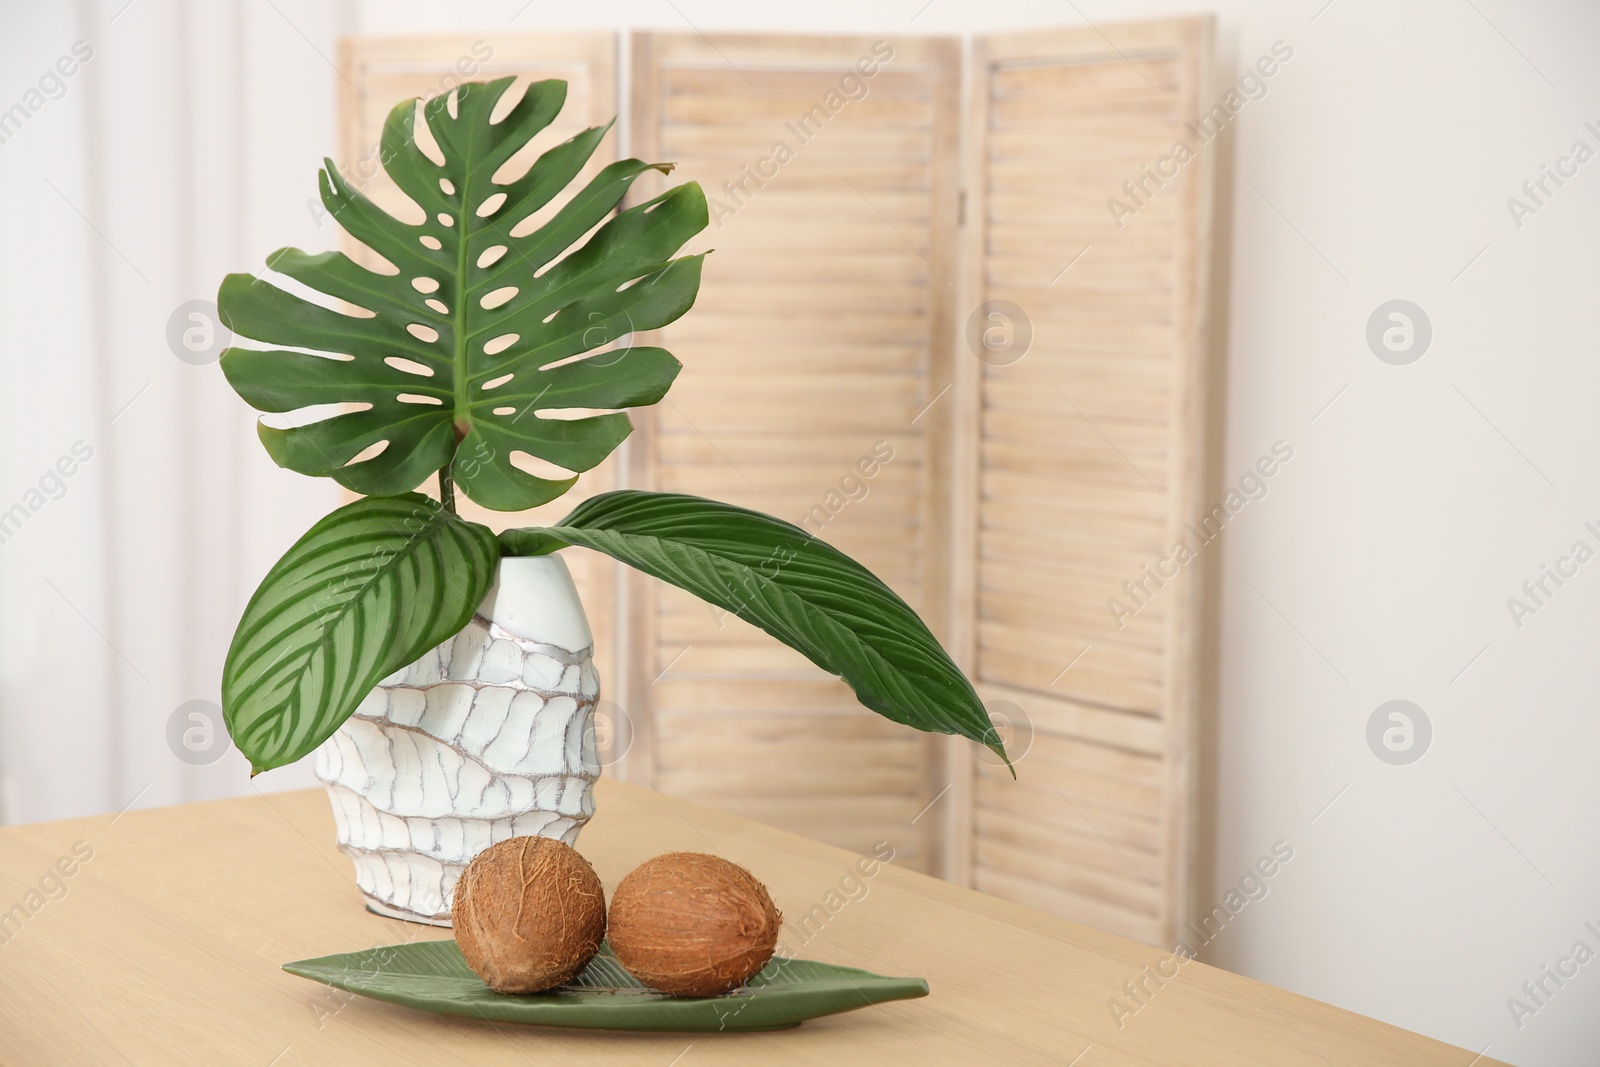 Photo of Vase with tropical leaves on table indoors. Interior design element